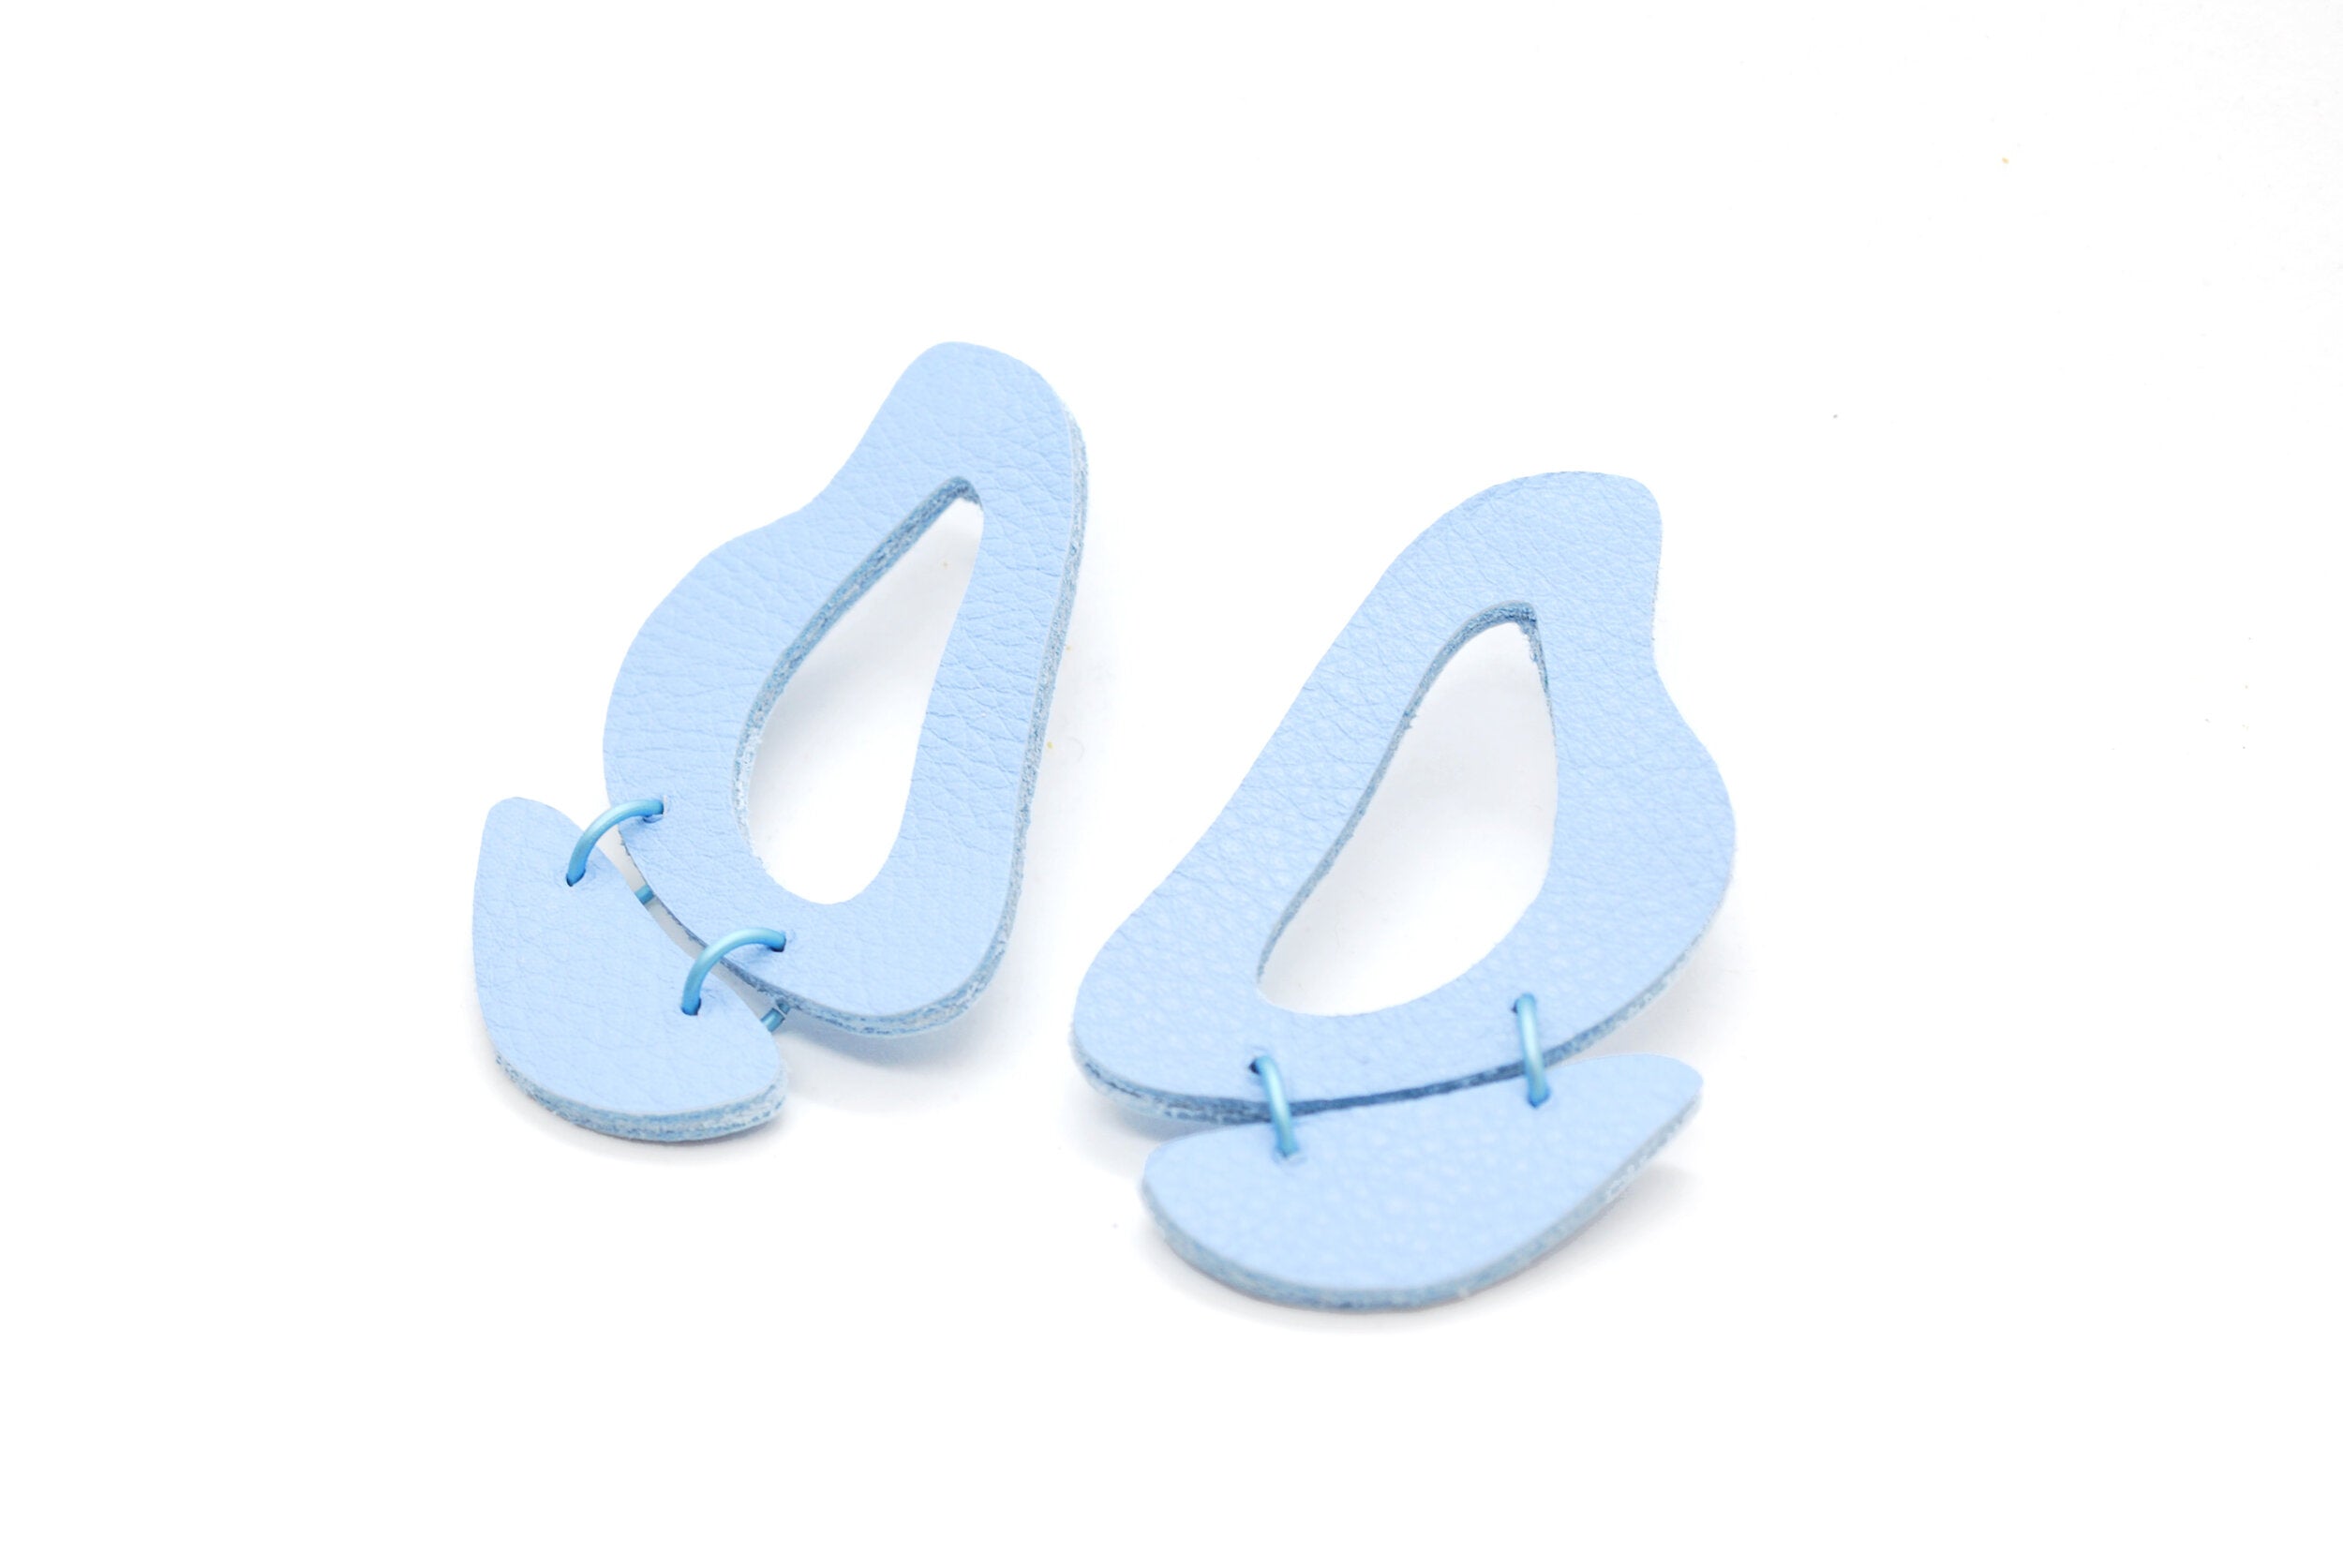 pastel blue leather earrings made of cutout organic shapes and anodized aluminum jump rings.